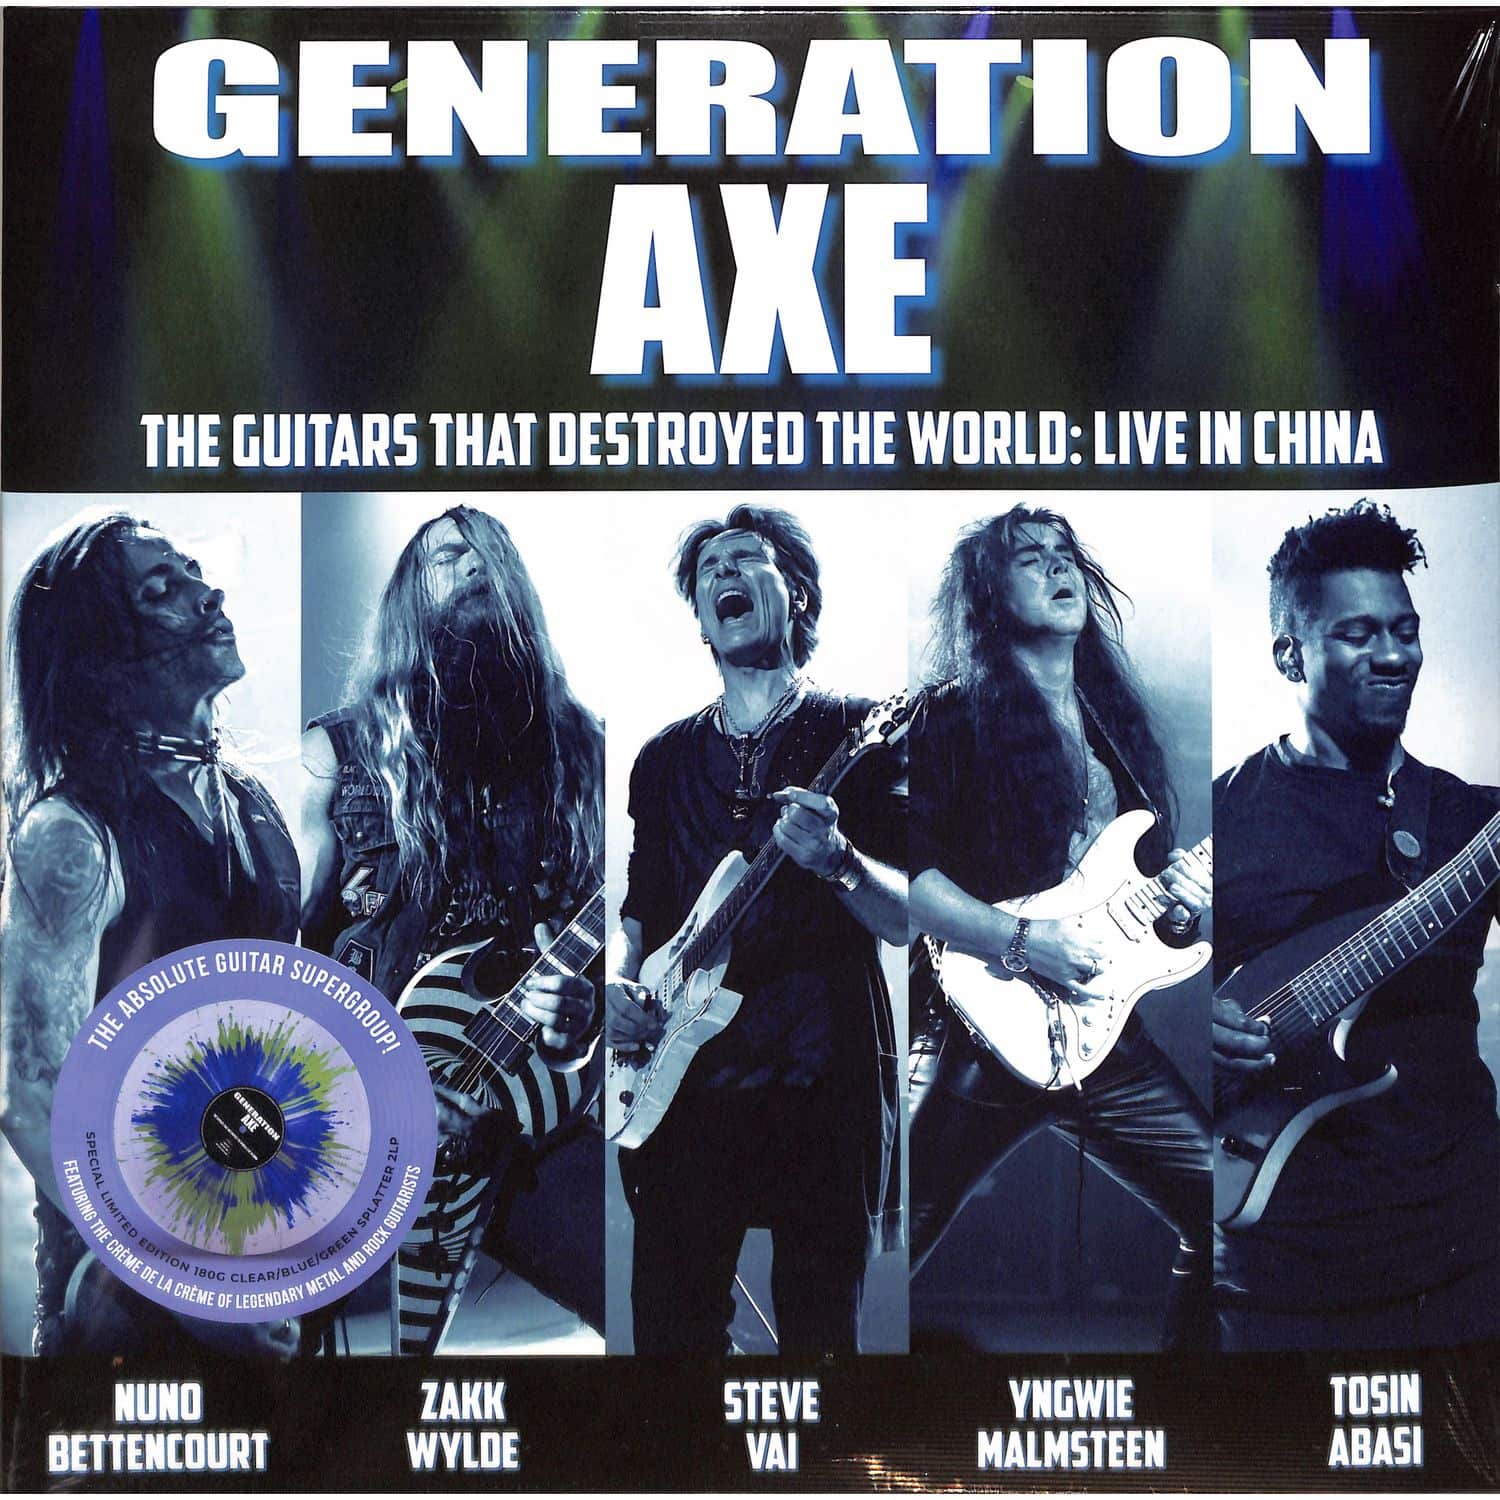 Vai/wylde/malmsteen/bettencourt/abasi - GENERATION AXE: GUITARS THAT DESTROYED THE WORLD - LIVE IN CHINA